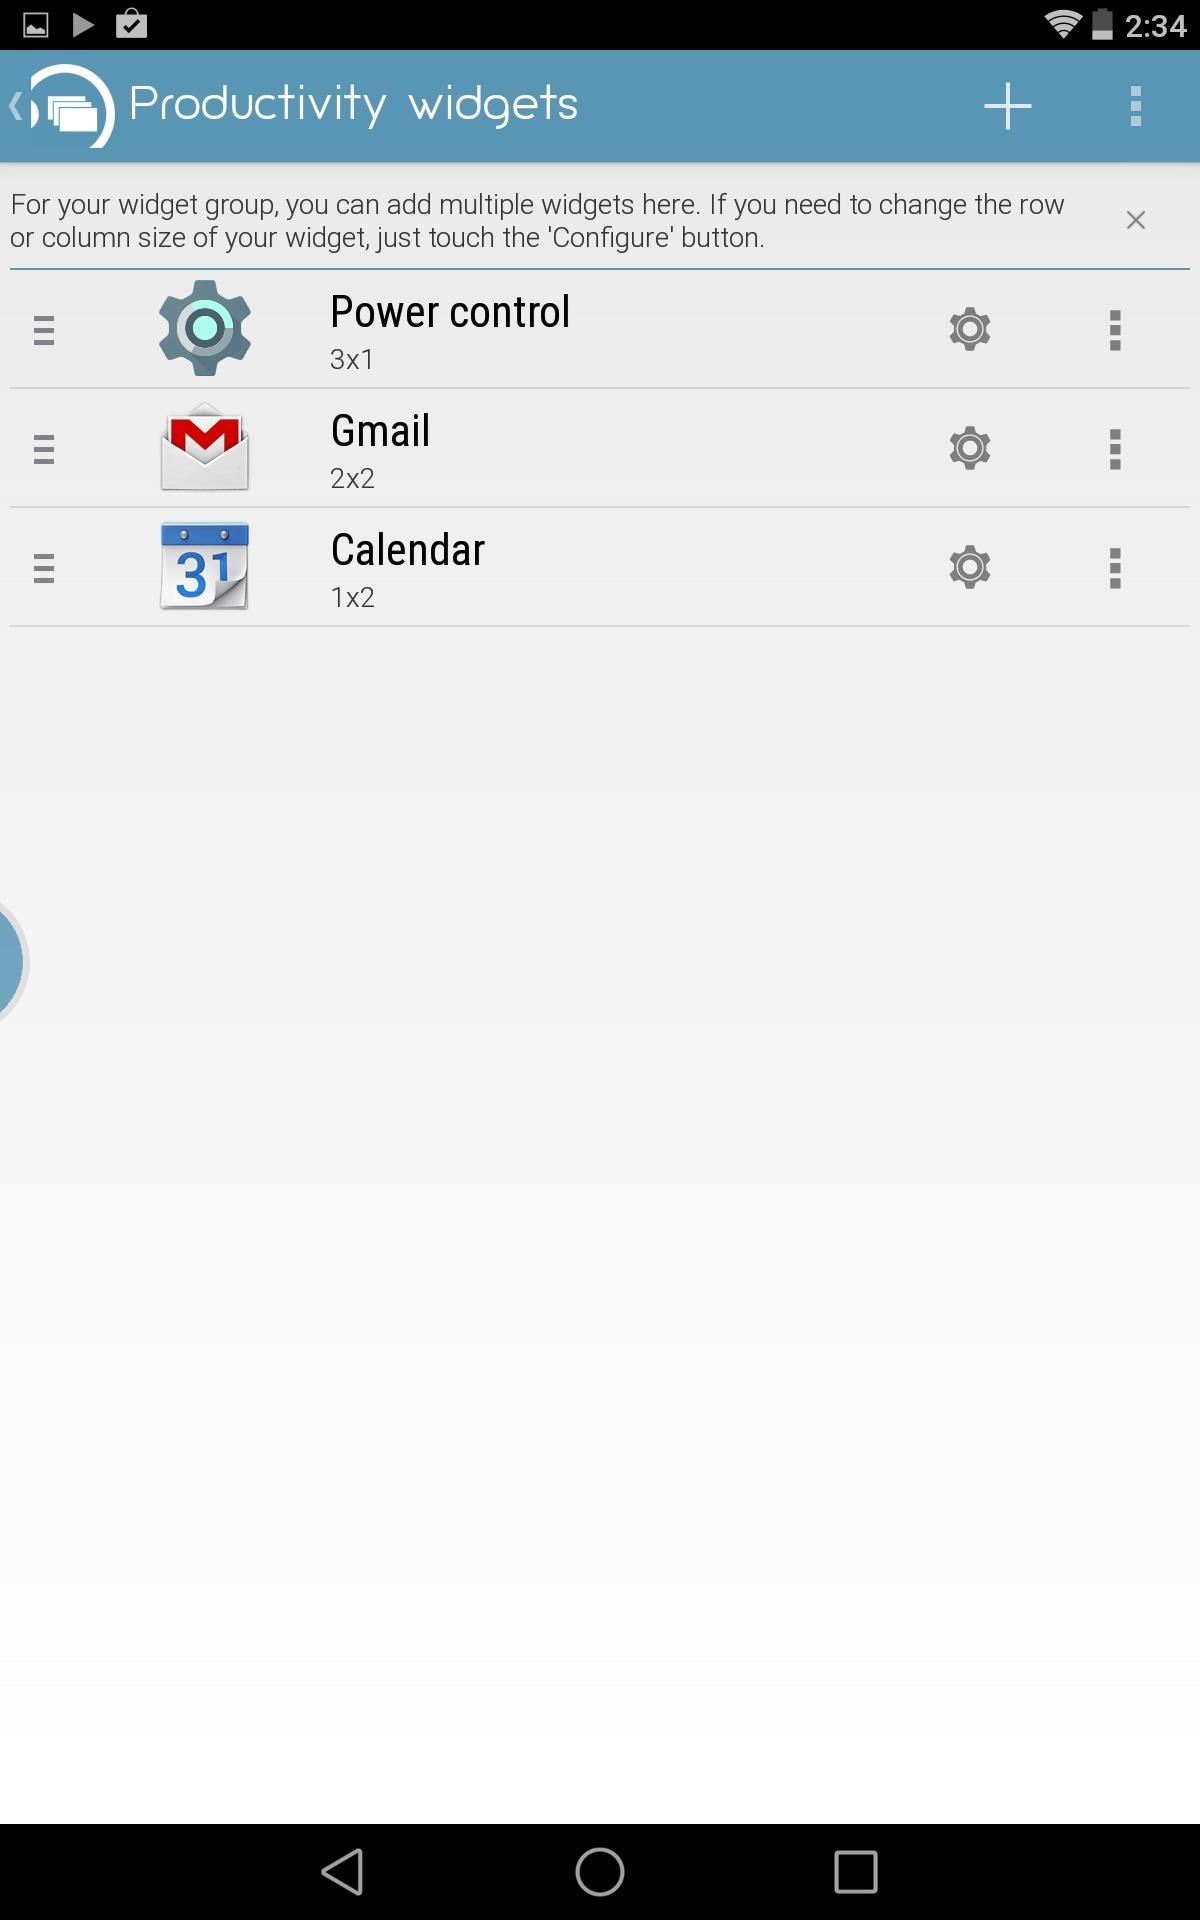 Access Widgets from Anywhere on Android